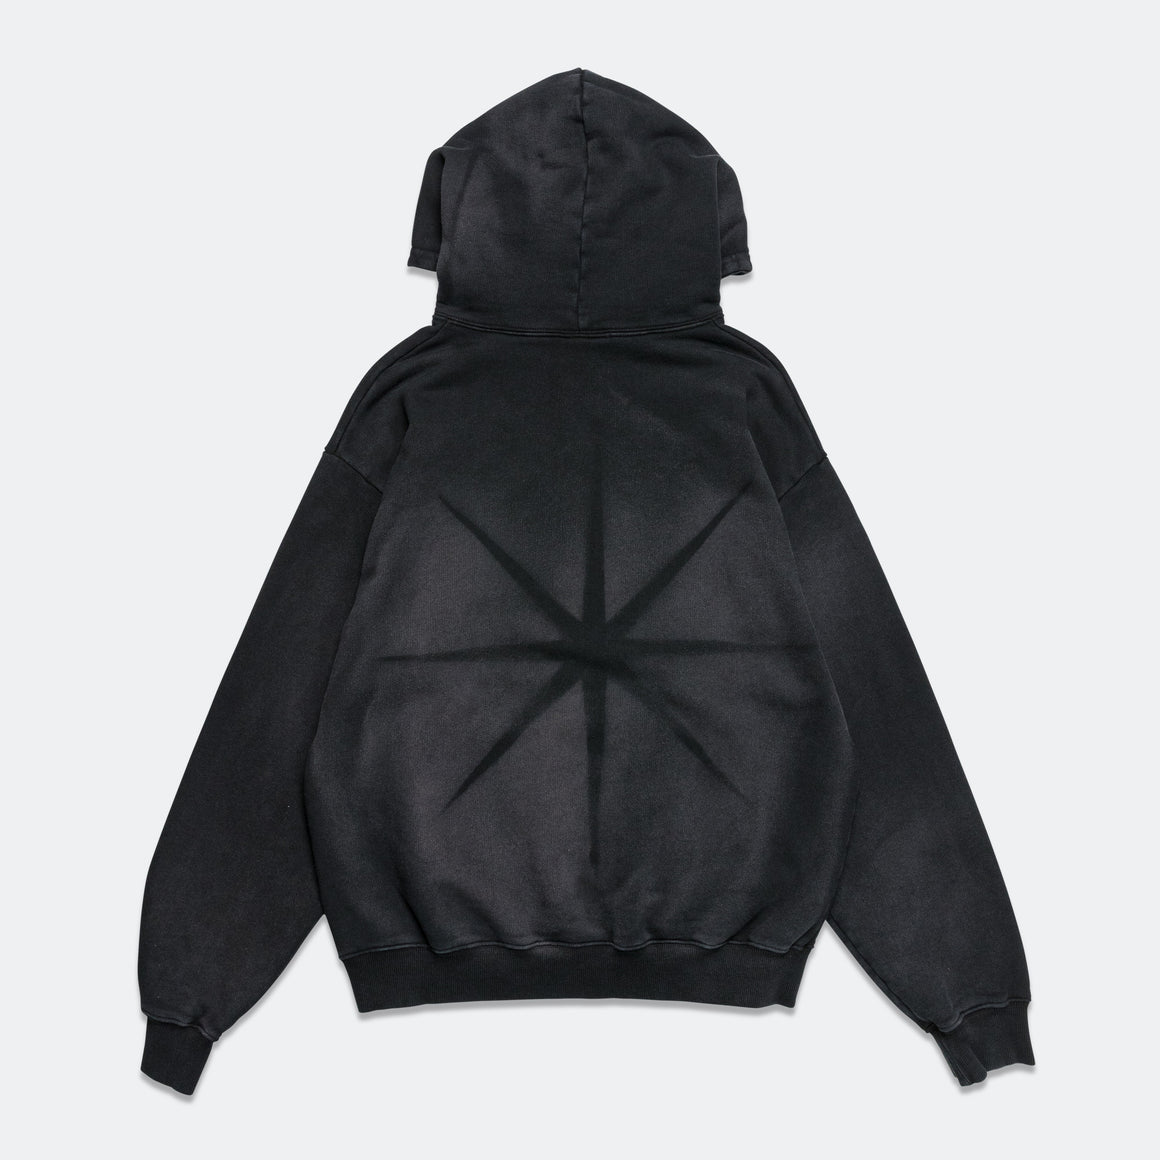 Pseushi - Pareidolia Hoodie - Star Faded Black - UP THERE